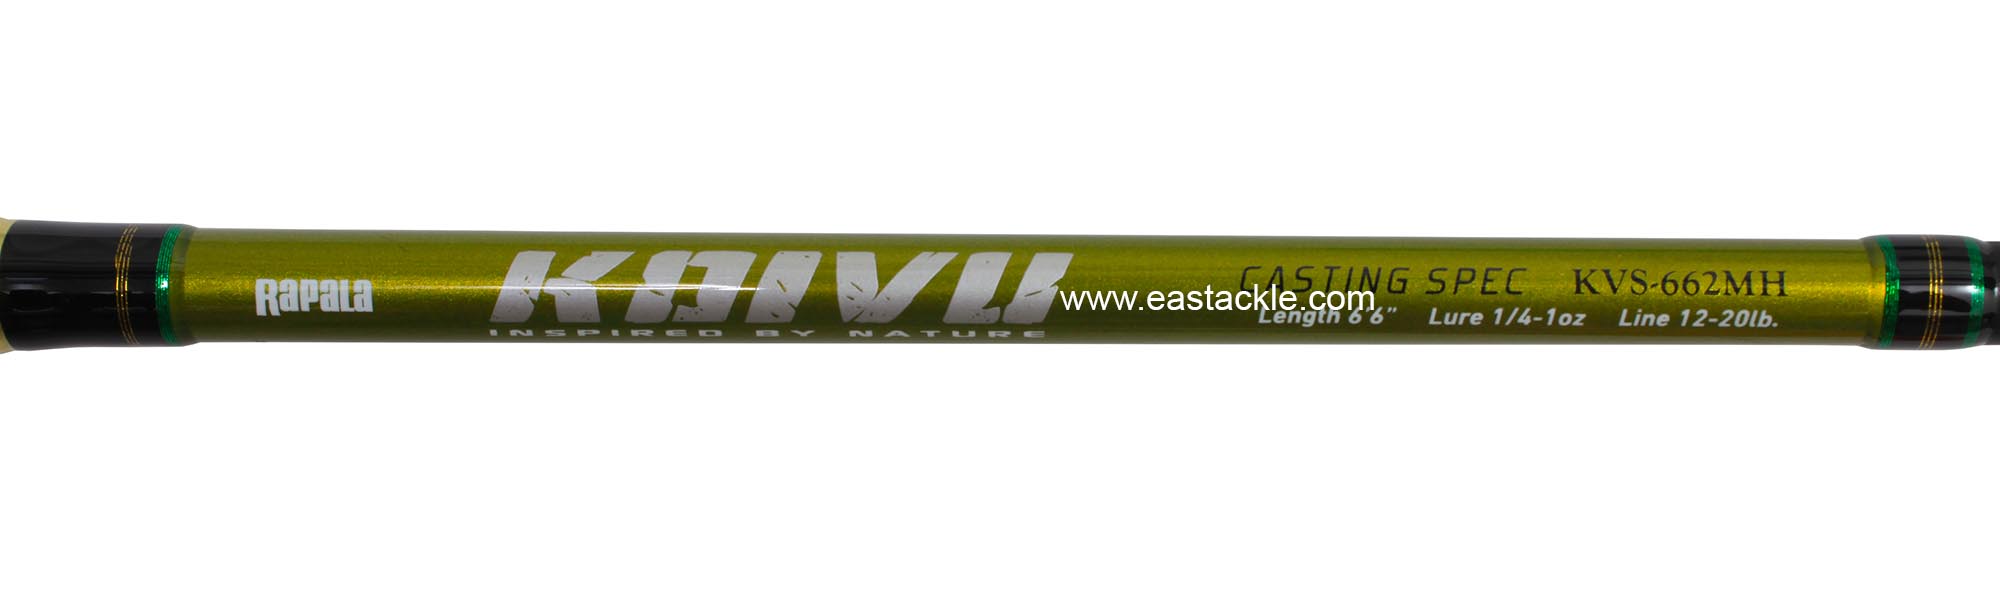 Rapala - Koivu - KVS662MH - Spinning Rod - Logo and Blank Specifications (Top View) | Eastackle